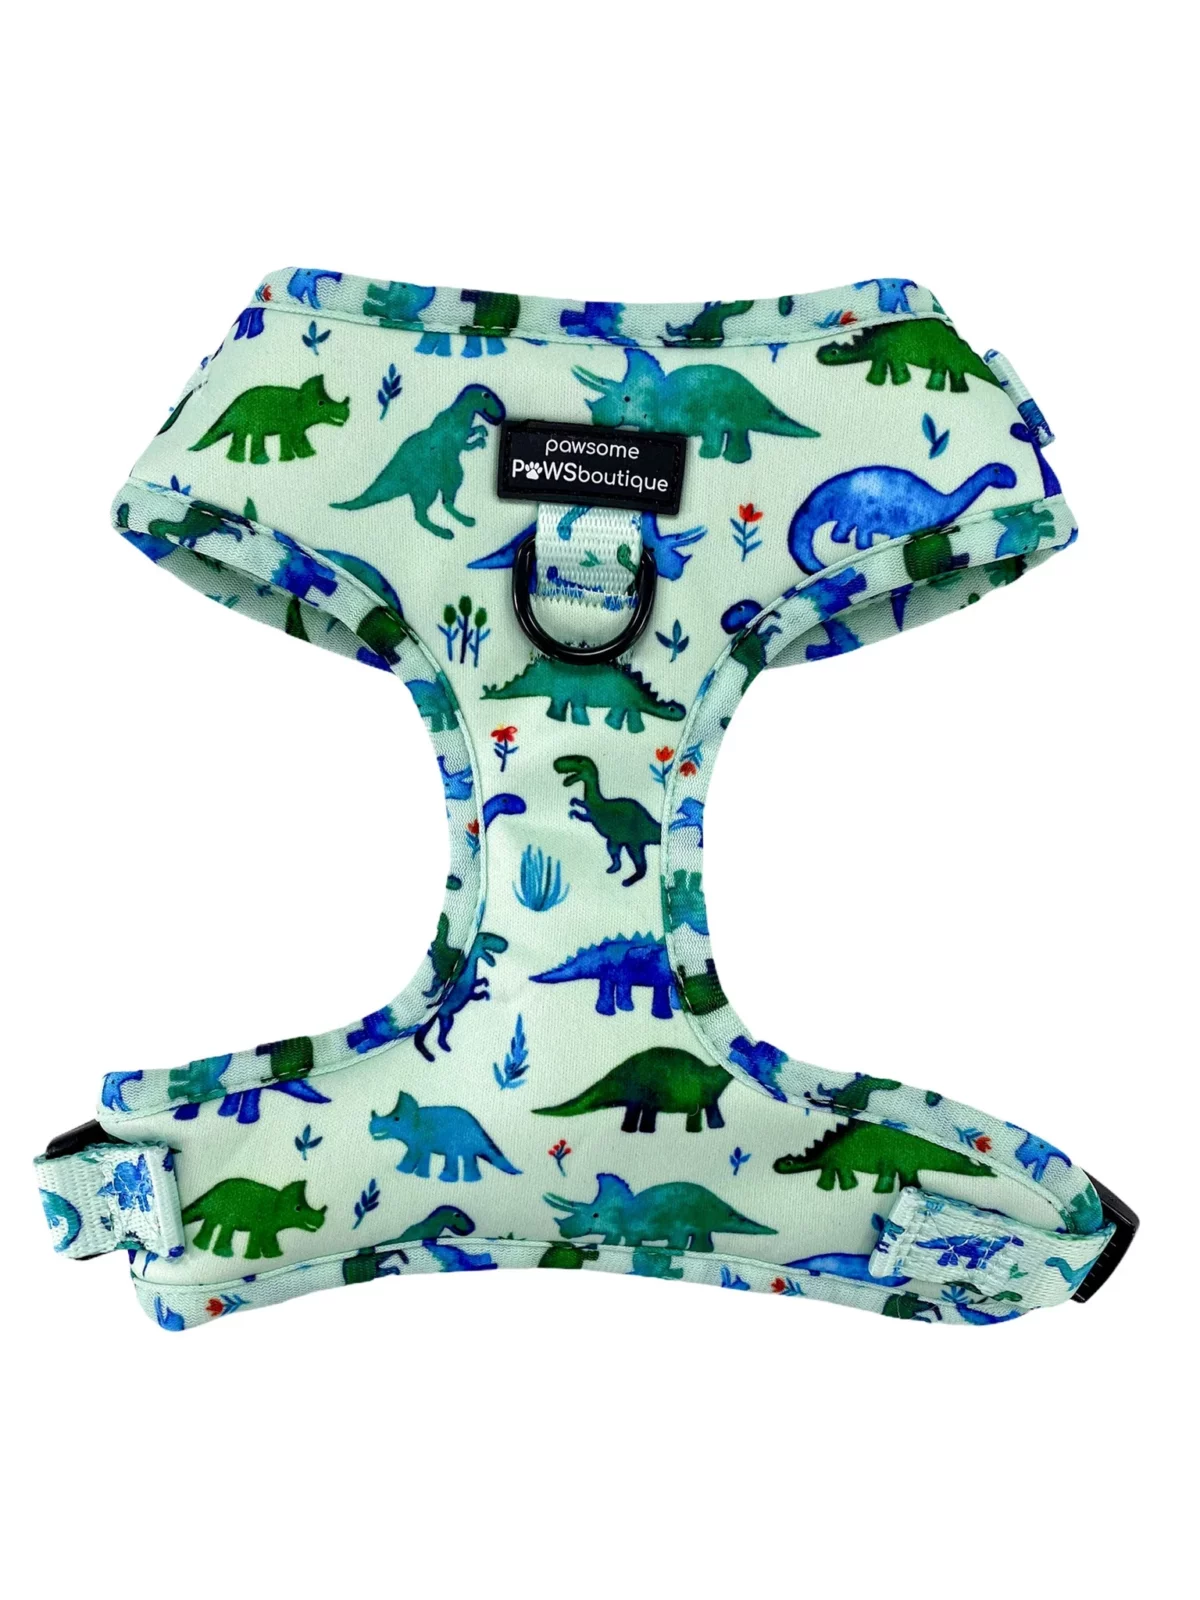 Pawsome Paws Boutique Dinky Dino Adjustable Harness from Catdog Store